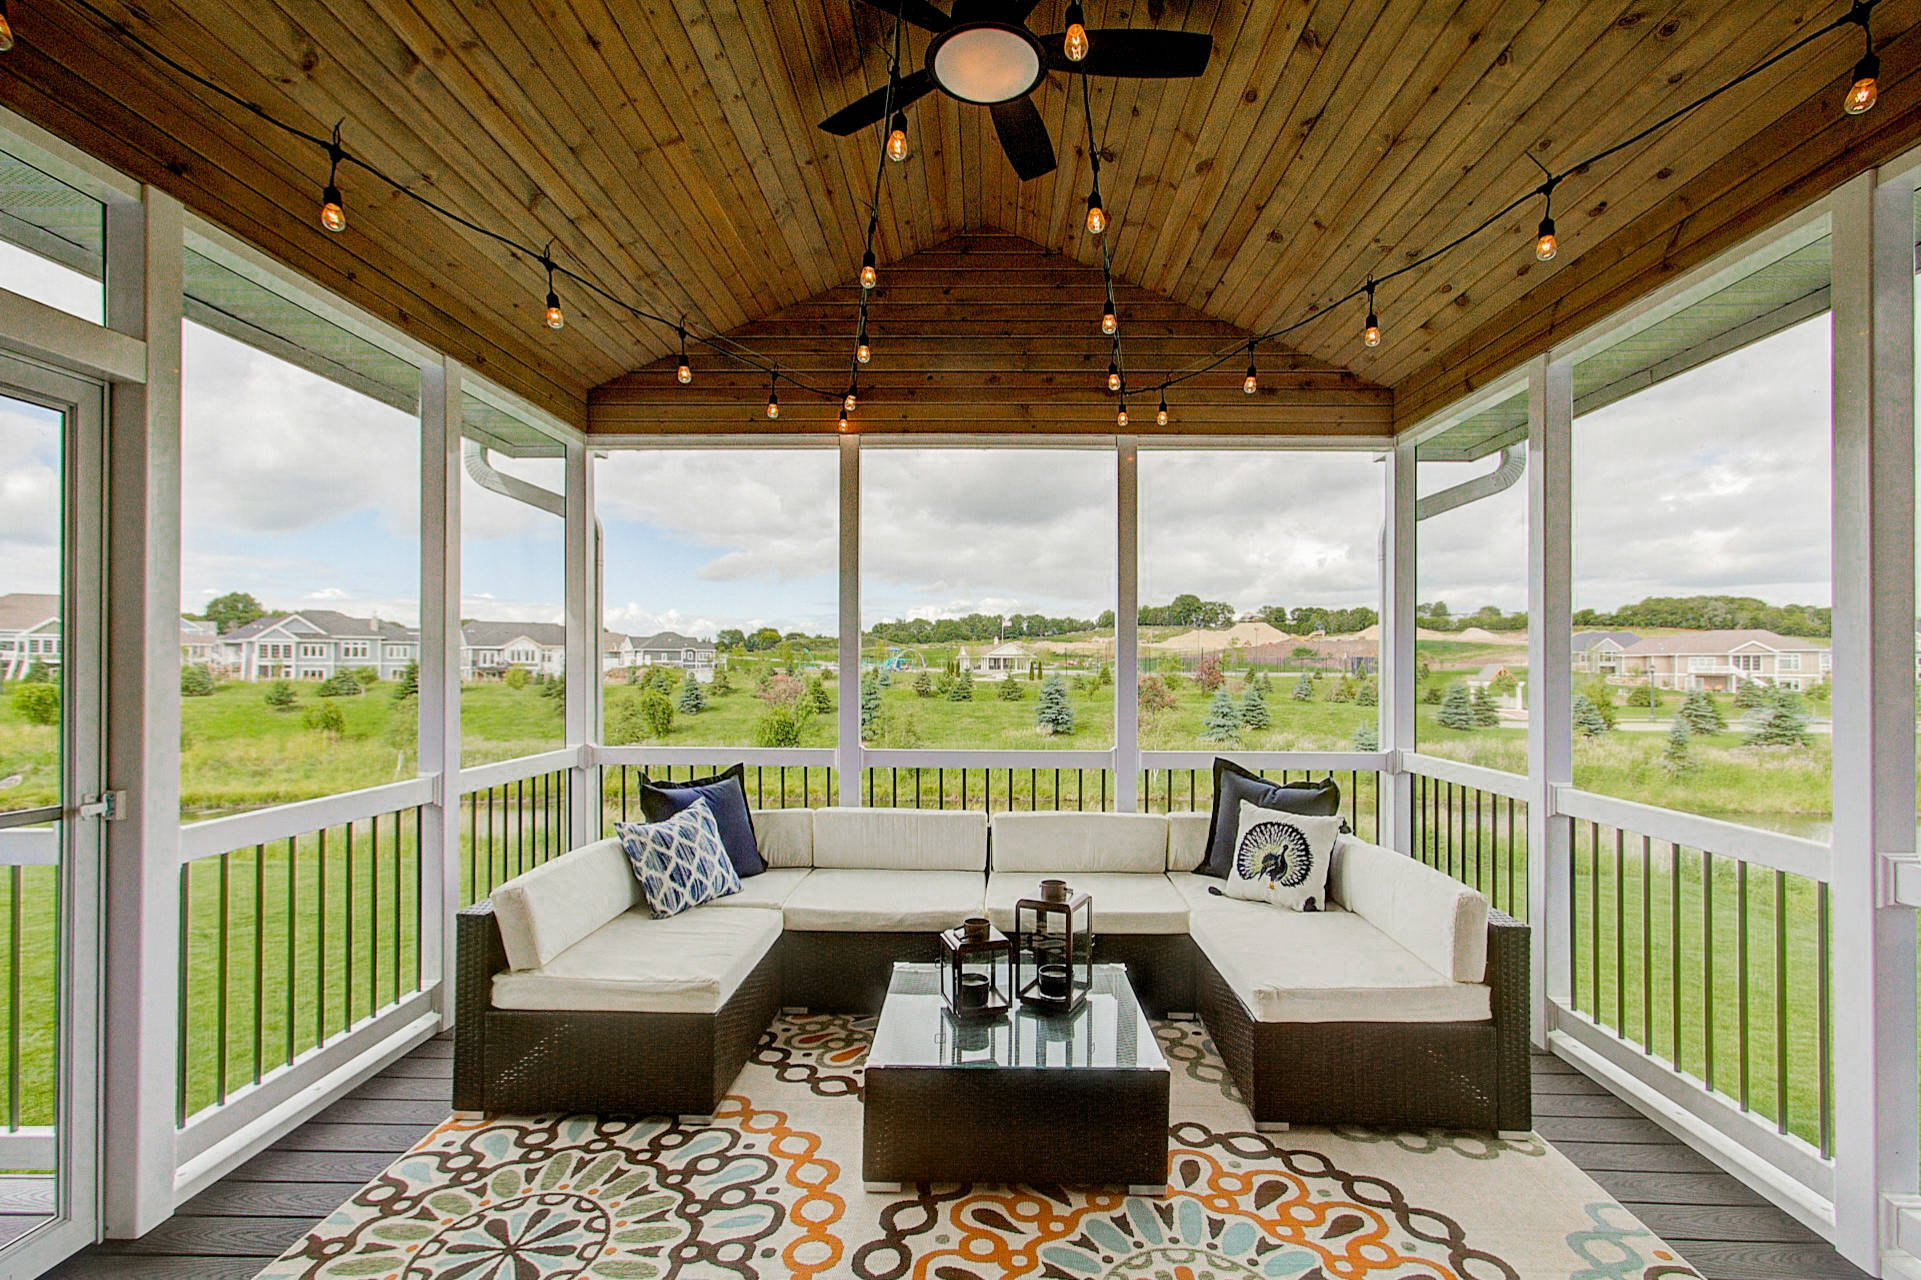 75 Beautiful Screened In Porch Pictures Ideas August 2021 Houzz